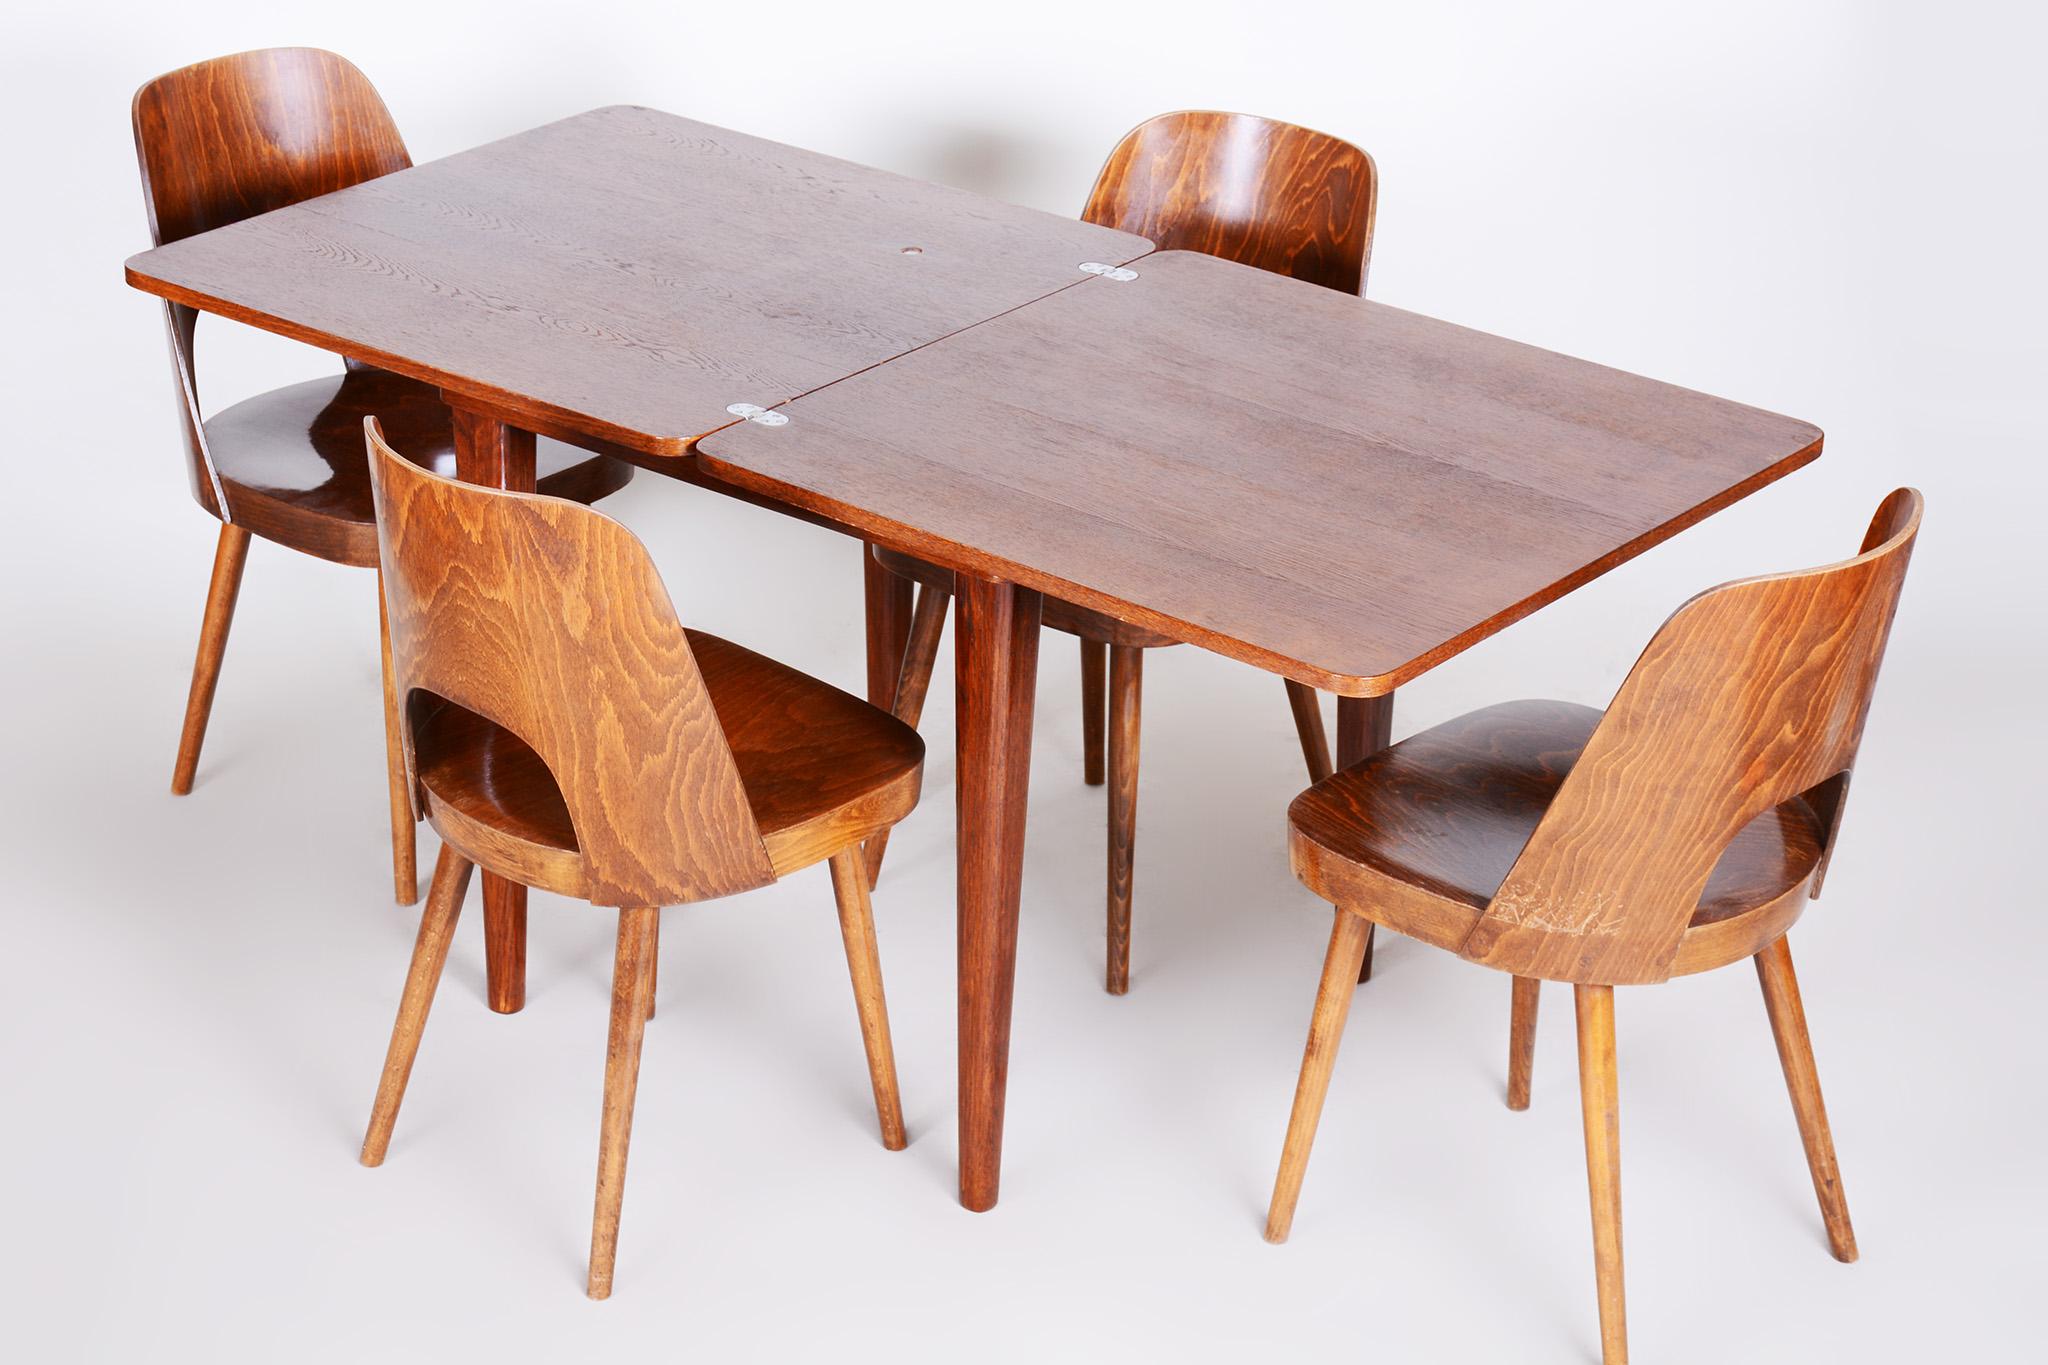 Small Folding Dining Table Made in 1940s Czechia, Designed by Halabala 5